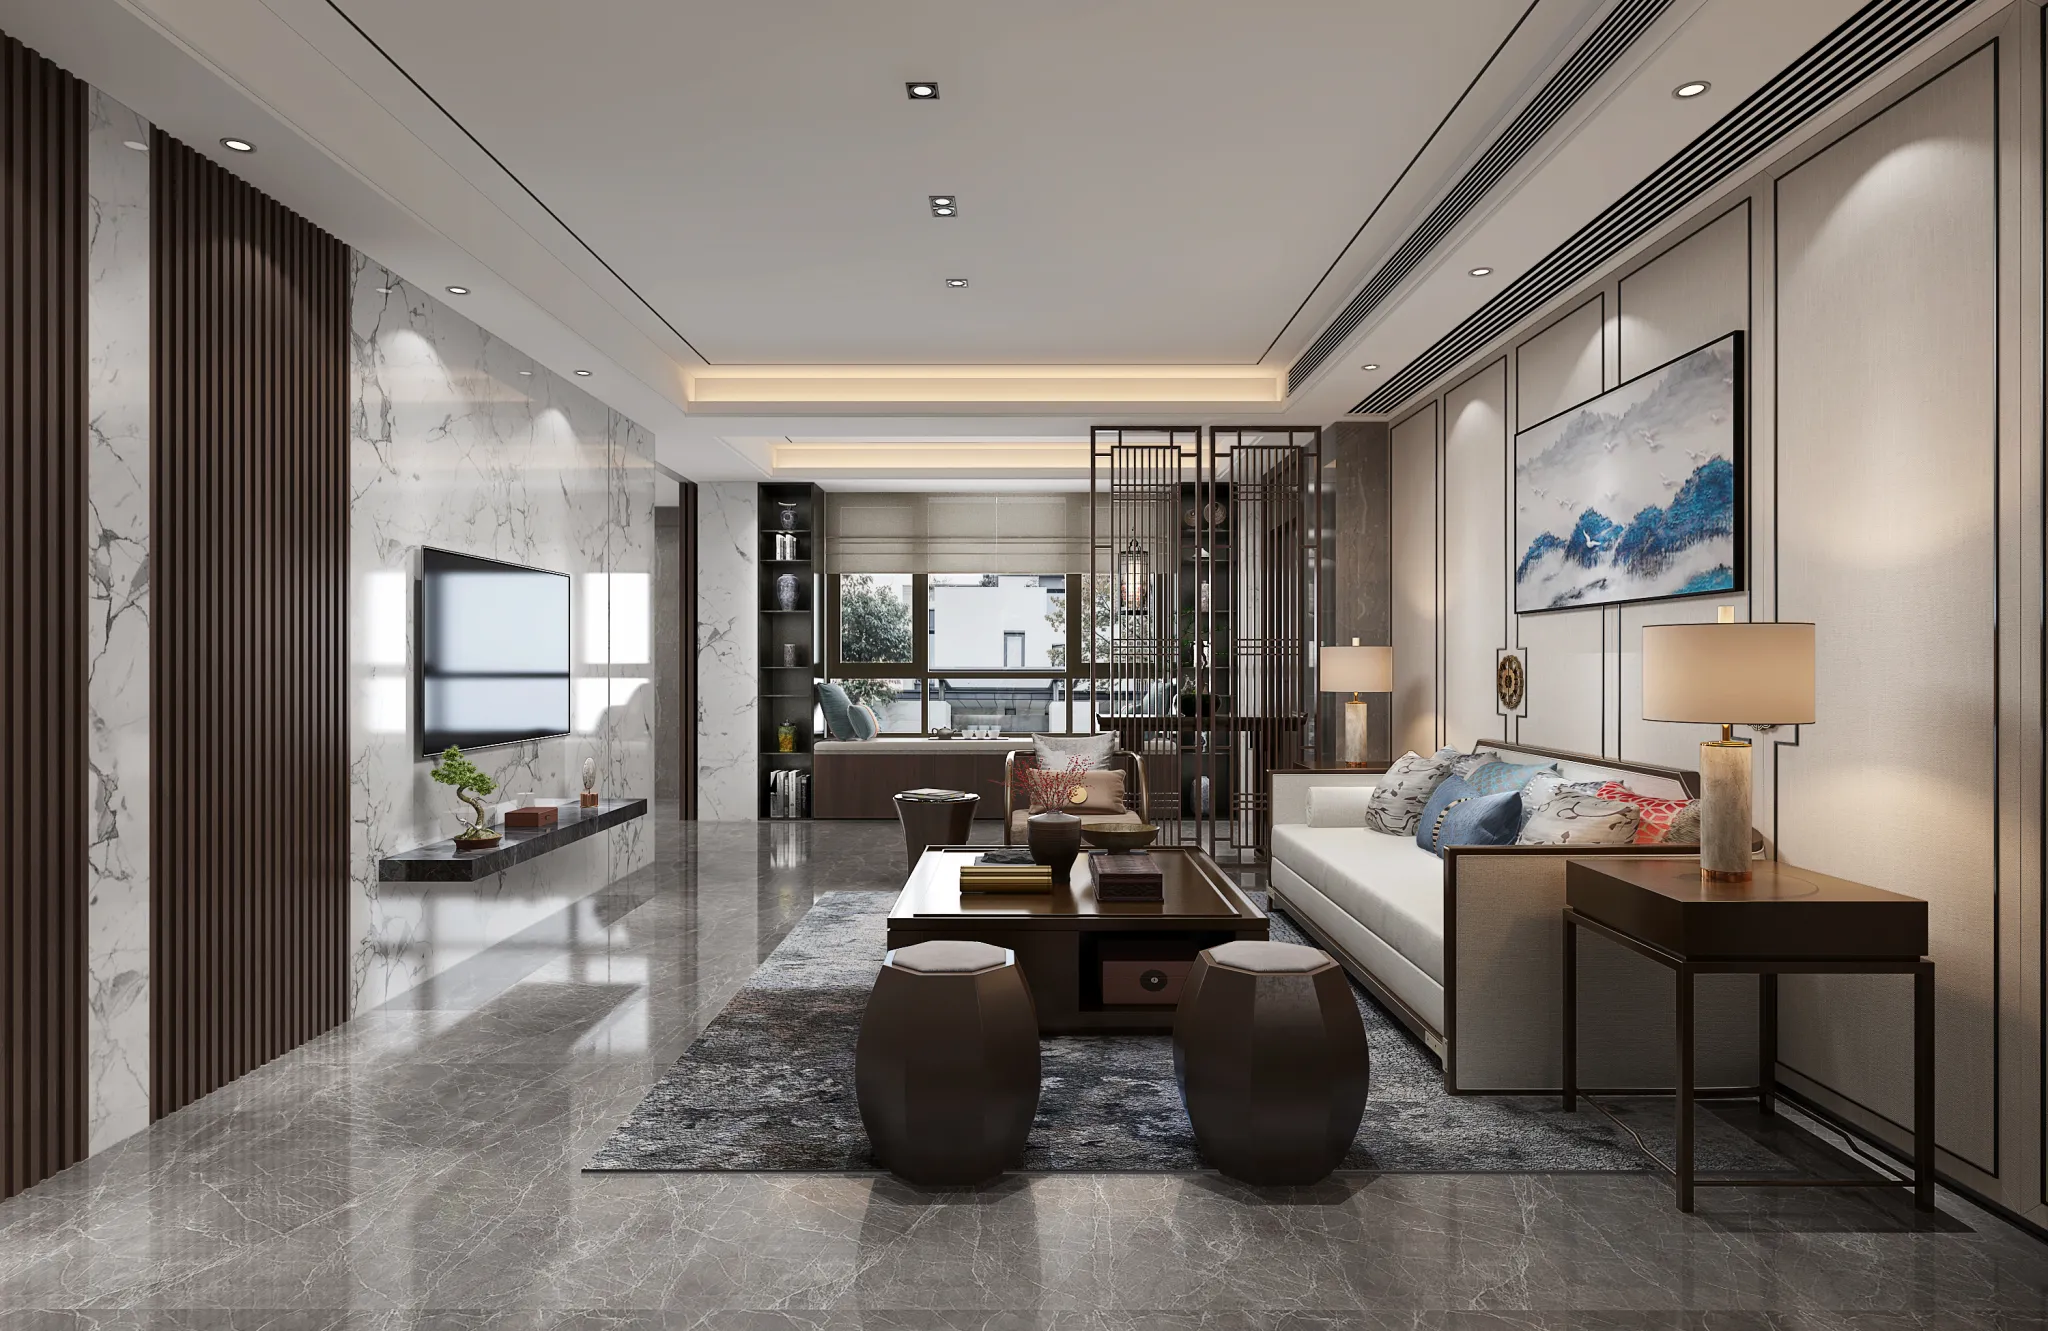 DESMOD INTERIOR 2021 (VRAY) – 4. LIVING ROOM – CHINESE – 020